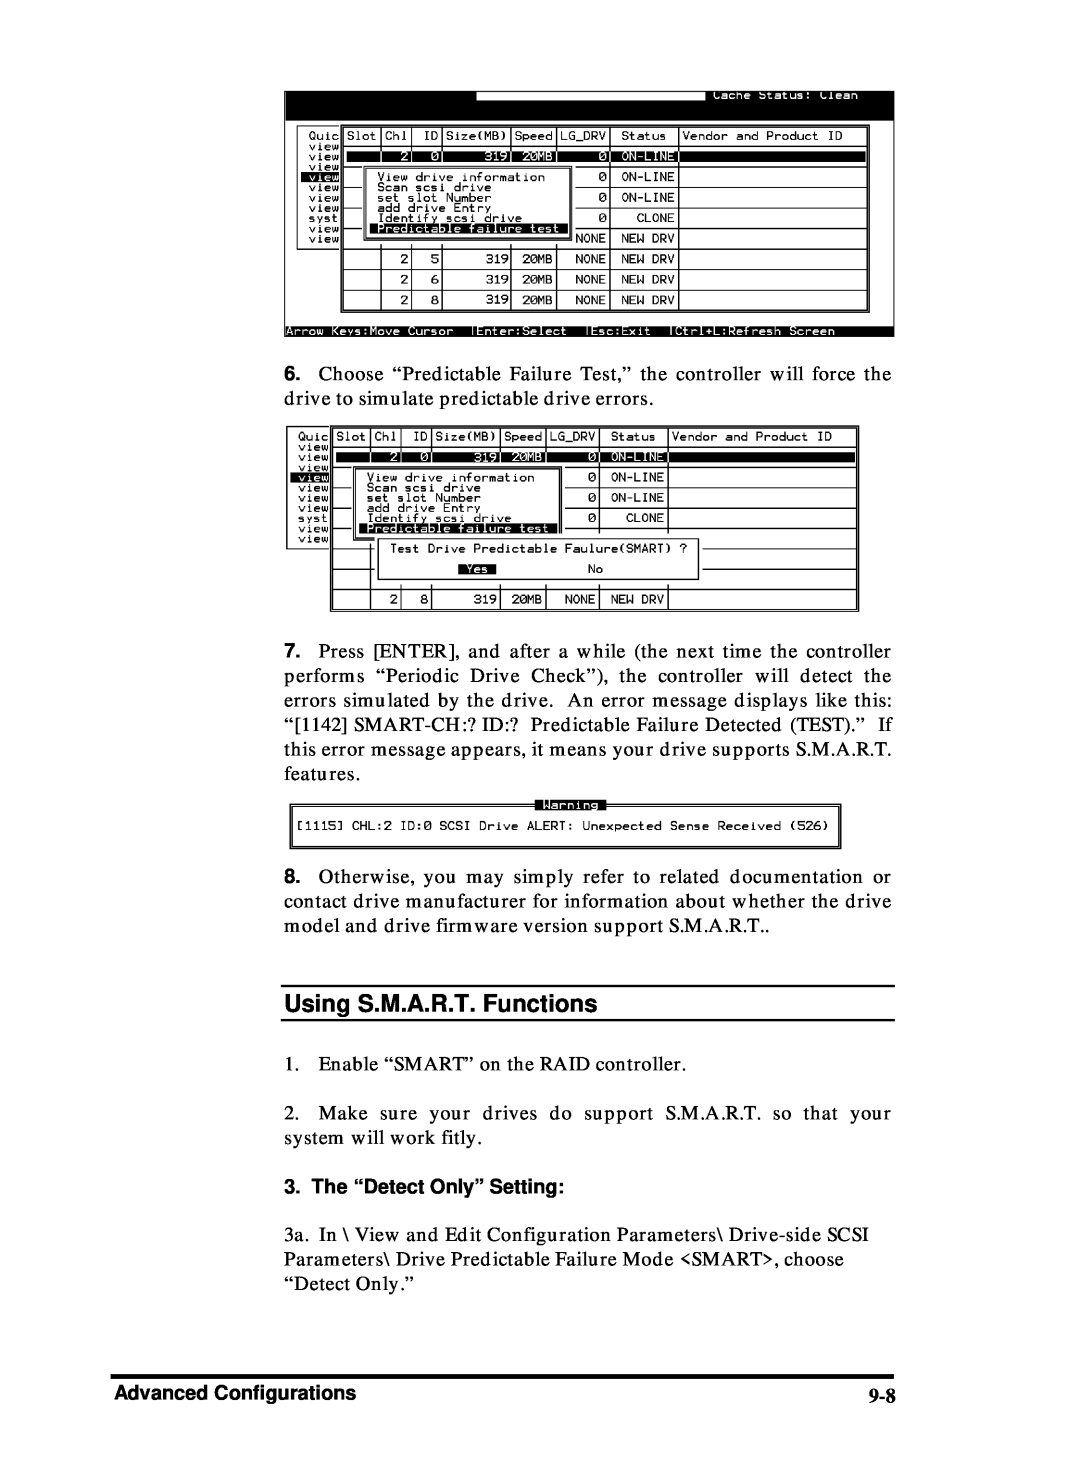 Compaq Infortrend manual Using S.M.A.R.T. Functions 